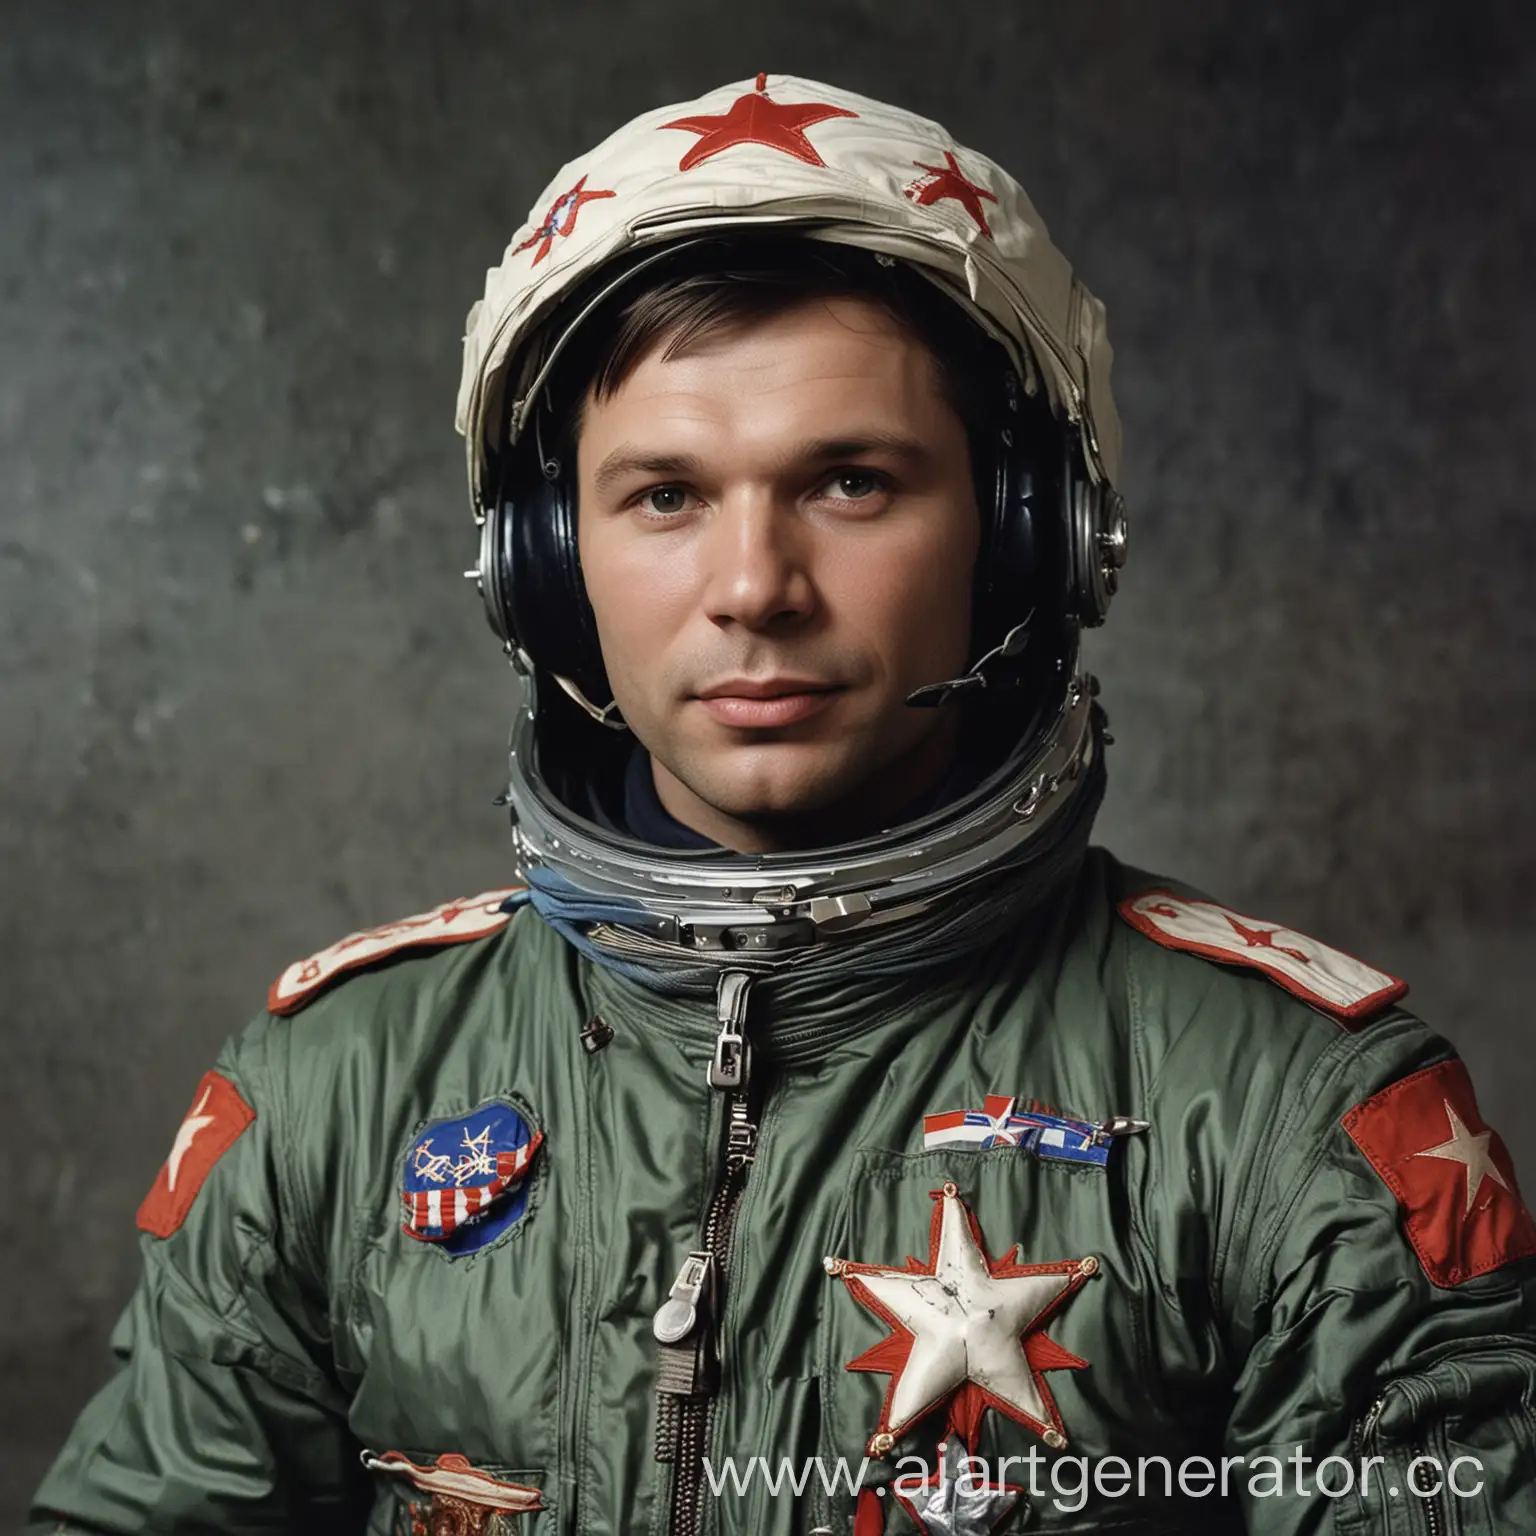 Exploring-Space-Tribute-to-Gagarins-Historic-Journey